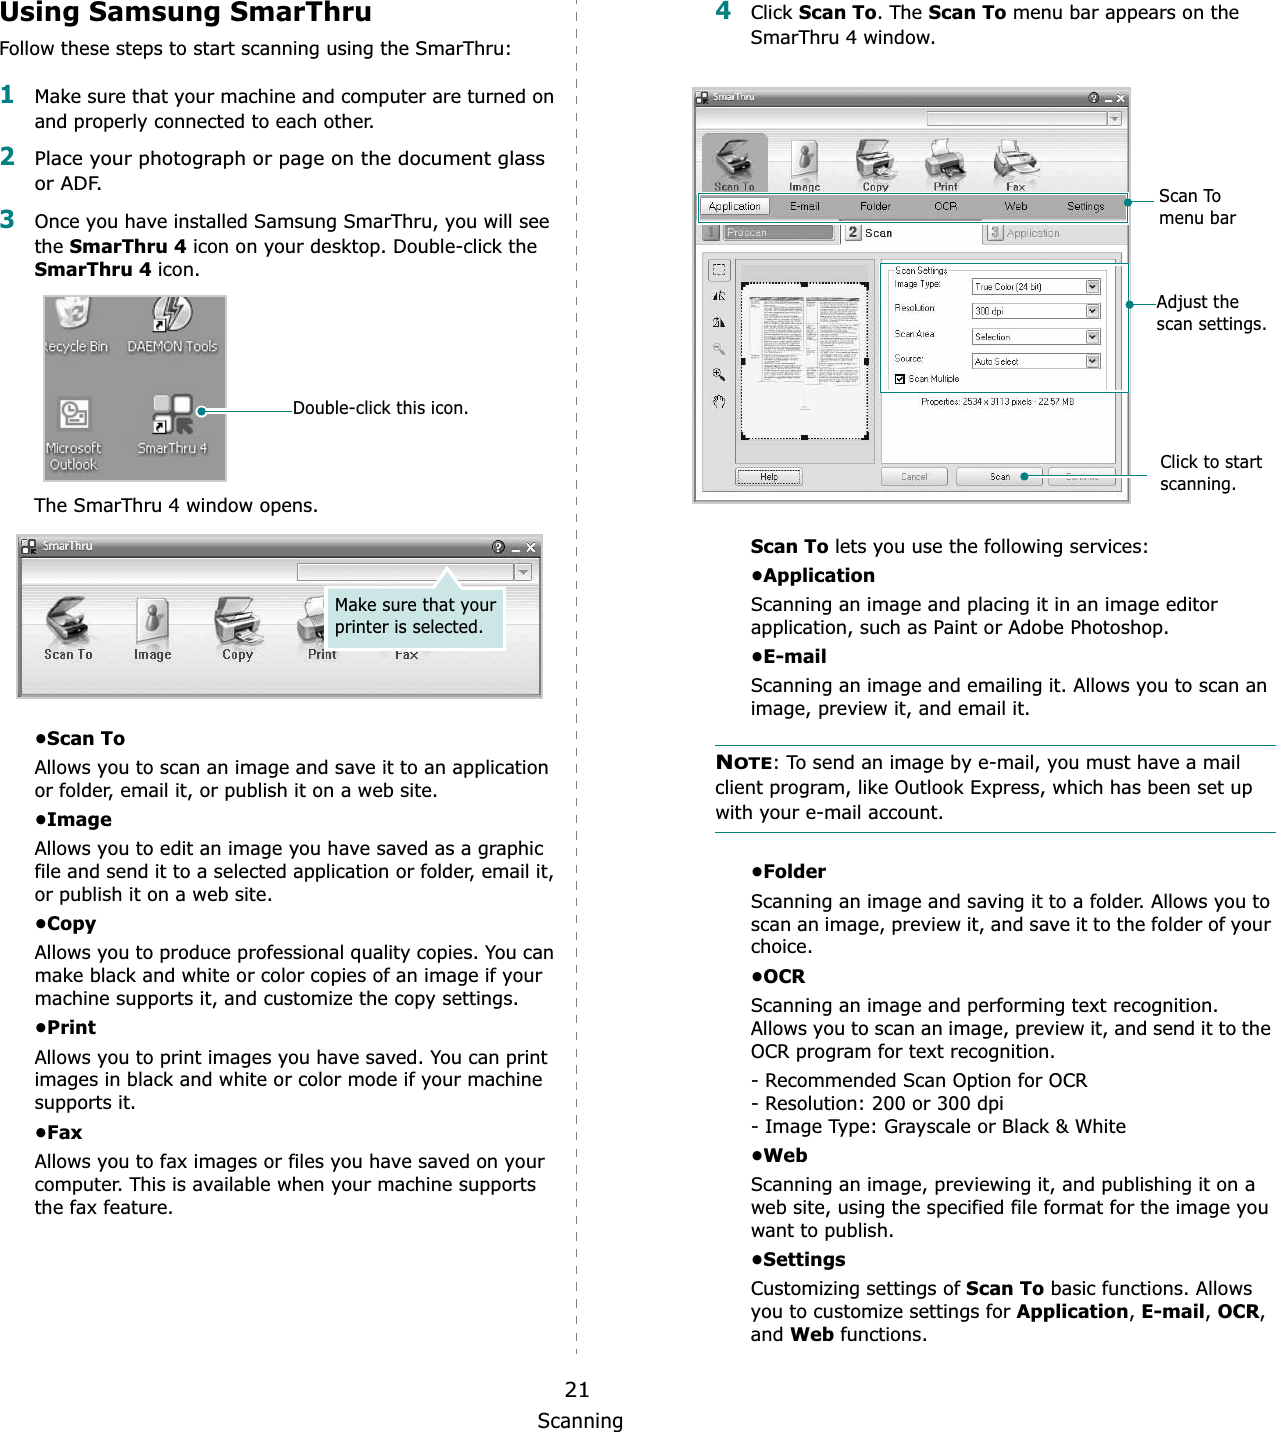 Scanning21Using Samsung SmarThruFollow these steps to start scanning using the SmarThru:1Make sure that your machine and computer are turned on and properly connected to each other. 2Place your photograph or page on the document glass or ADF.3Once you have installed Samsung SmarThru, you will see theSmarThru 4 icon on your desktop. Double-click the SmarThru 4 icon.The SmarThru 4 window opens.•Scan ToAllows you to scan an image and save it to an application or folder, email it, or publish it on a web site. •ImageAllows you to edit an image you have saved as a graphic file and send it to a selected application or folder, email it, or publish it on a web site. •CopyAllows you to produce professional quality copies. You can make black and white or color copies of an image if your machine supports it, and customize the copy settings. •PrintAllows you to print images you have saved. You can print images in black and white or color mode if your machine supports it.•FaxAllows you to fax images or files you have saved on your computer. This is available when your machine supports the fax feature. Double-click this icon.Make sure that your printer is selected.4Click Scan To. The Scan To menu bar appears on the SmarThru 4 window.Scan To lets you use the following services:•ApplicationScanning an image and placing it in an image editor application, such as Paint or Adobe Photoshop. •E-mailScanning an image and emailing it. Allows you to scan an image, preview it, and email it. NOTE: To send an image by e-mail, you must have a mail client program, like Outlook Express, which has been set up with your e-mail account.•FolderScanning an image and saving it to a folder. Allows you to scan an image, preview it, and save it to the folder of your choice.•OCRScanning an image and performing text recognition. Allows you to scan an image, preview it, and send it to the OCR program for text recognition. - Recommended Scan Option for OCR- Resolution: 200 or 300 dpi- Image Type: Grayscale or Black &amp; White•WebScanning an image, previewing it, and publishing it on a web site, using the specified file format for the image you want to publish.•SettingsCustomizing settings of Scan To basic functions. Allows you to customize settings for Application, E-mail, OCR,and Web functions.Adjust the scan settings.Scan To menu barClick to start scanning.